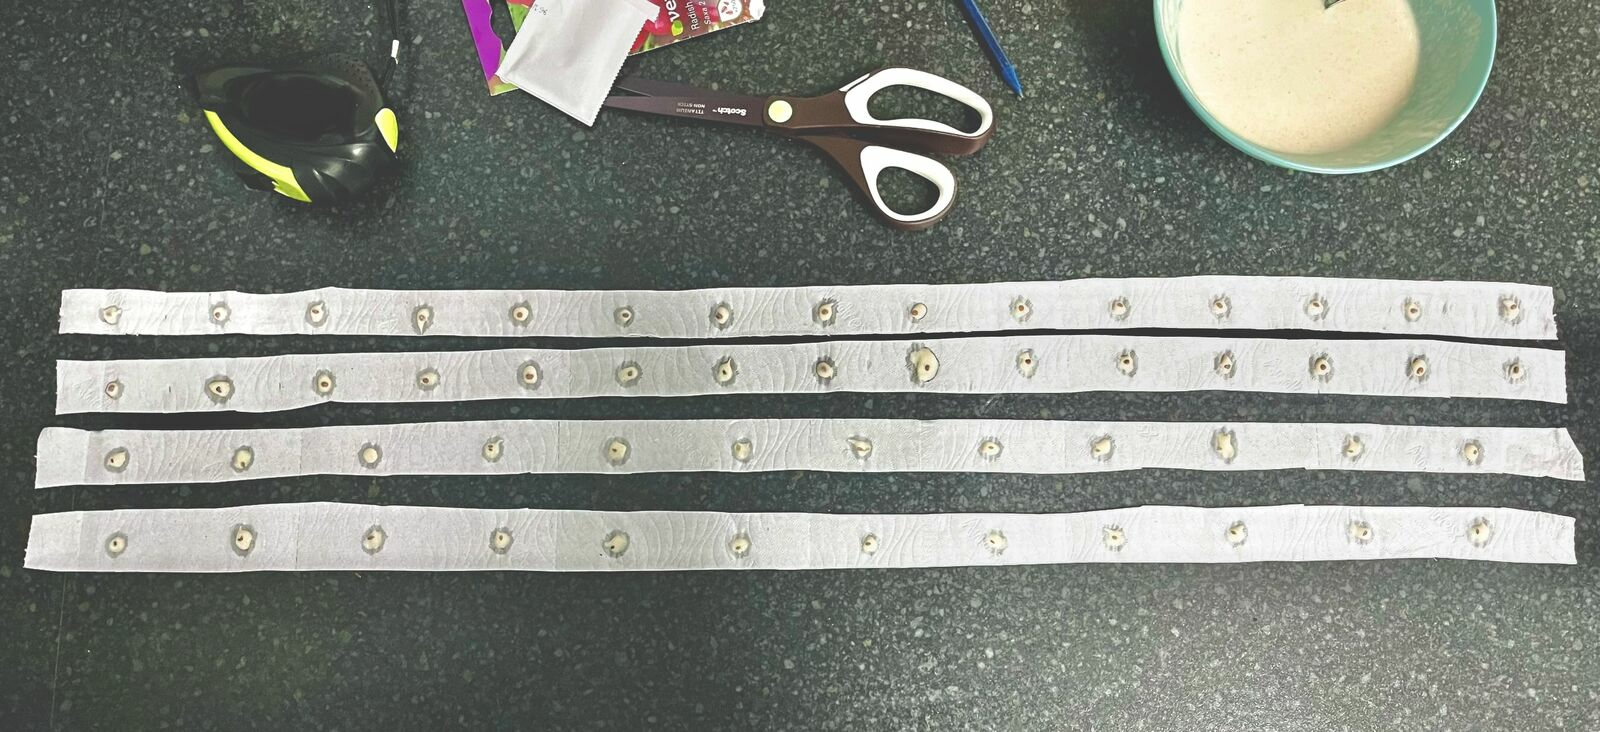 Making your own seed tape - instructions